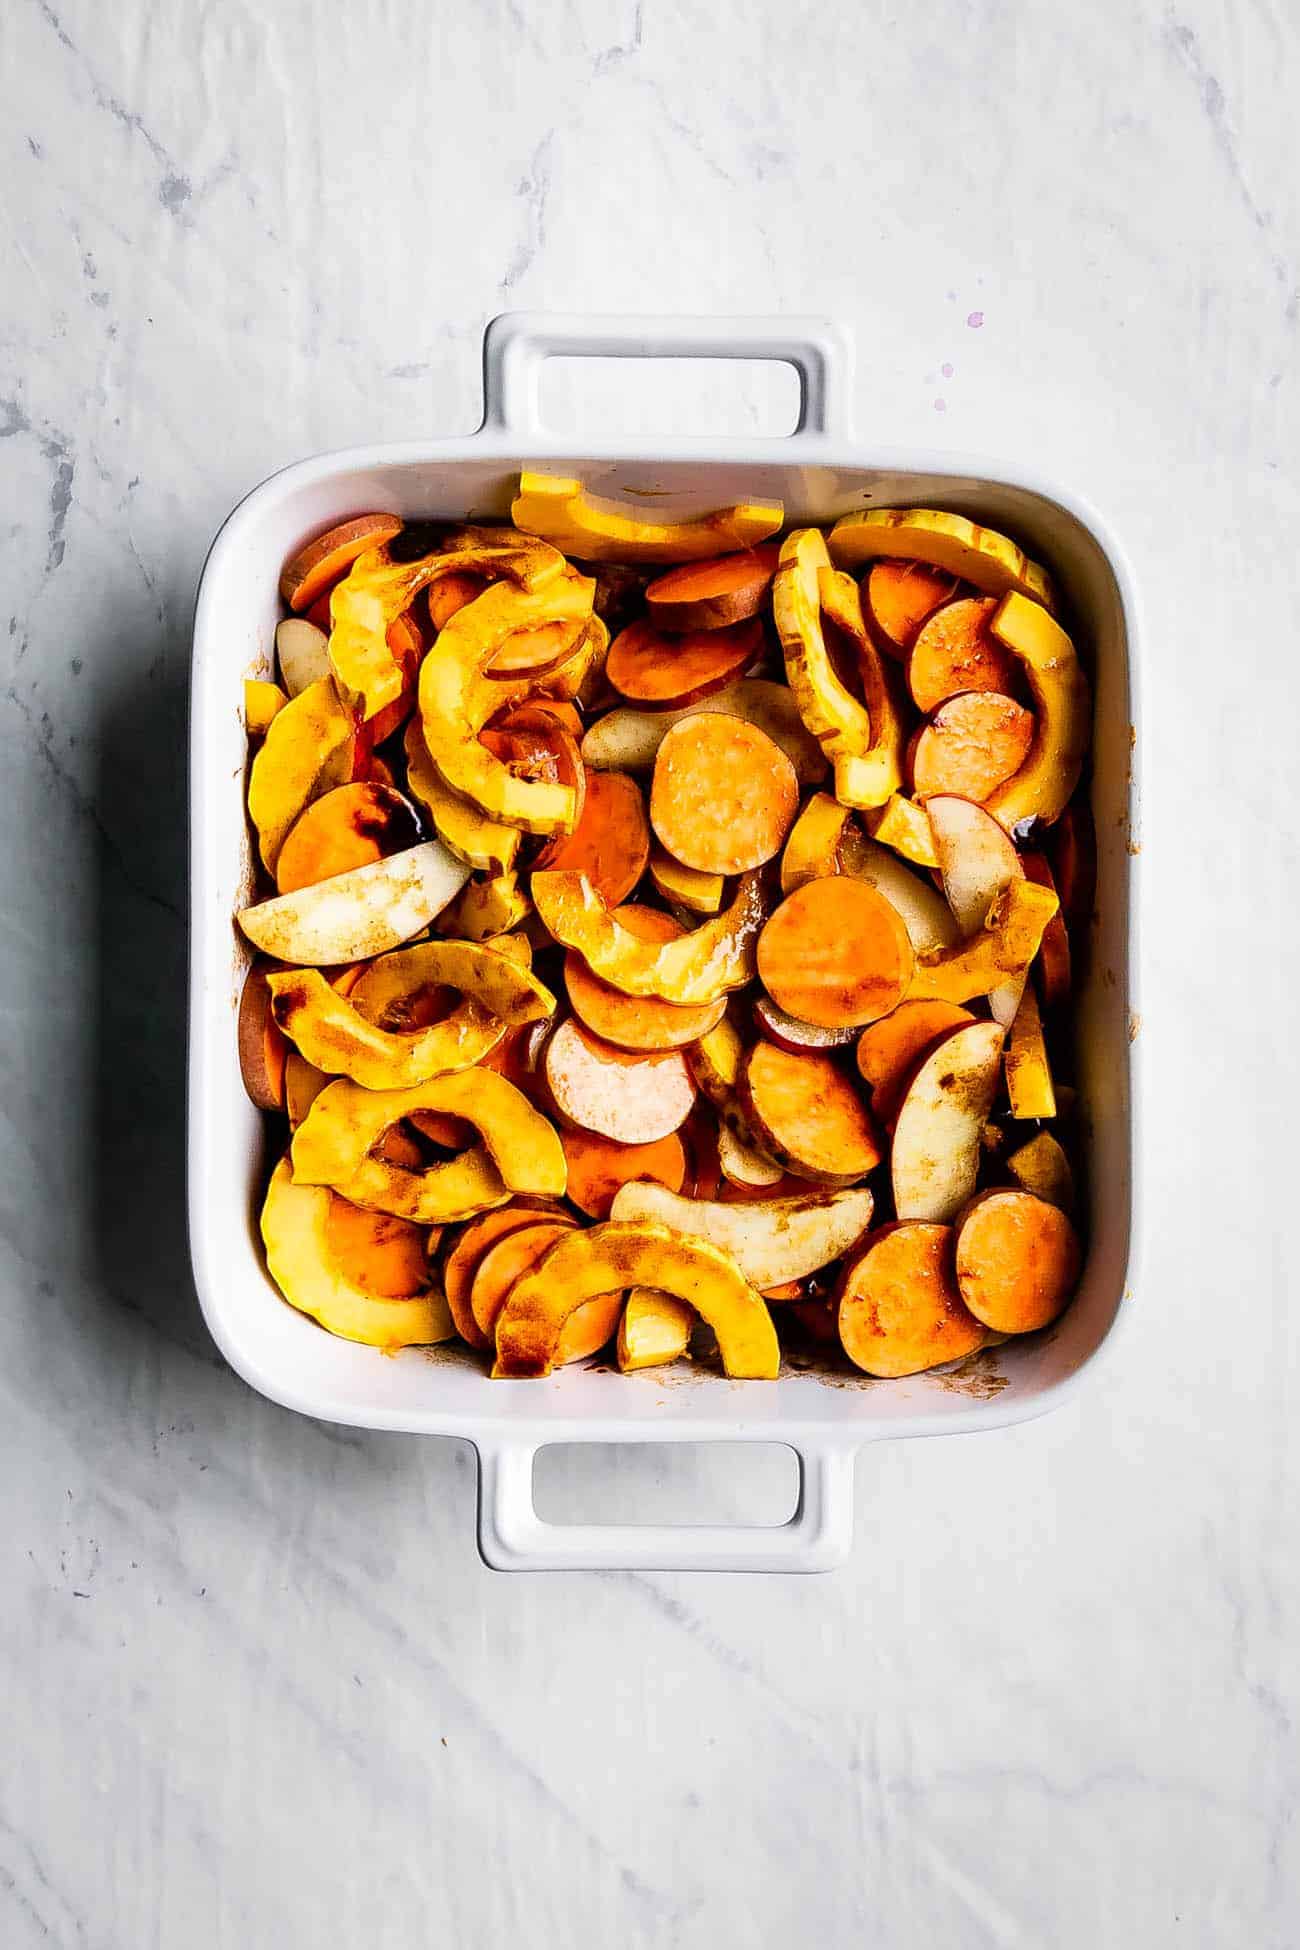 cut sweet potatoes, delicata squash, and apples in a white casserole dish